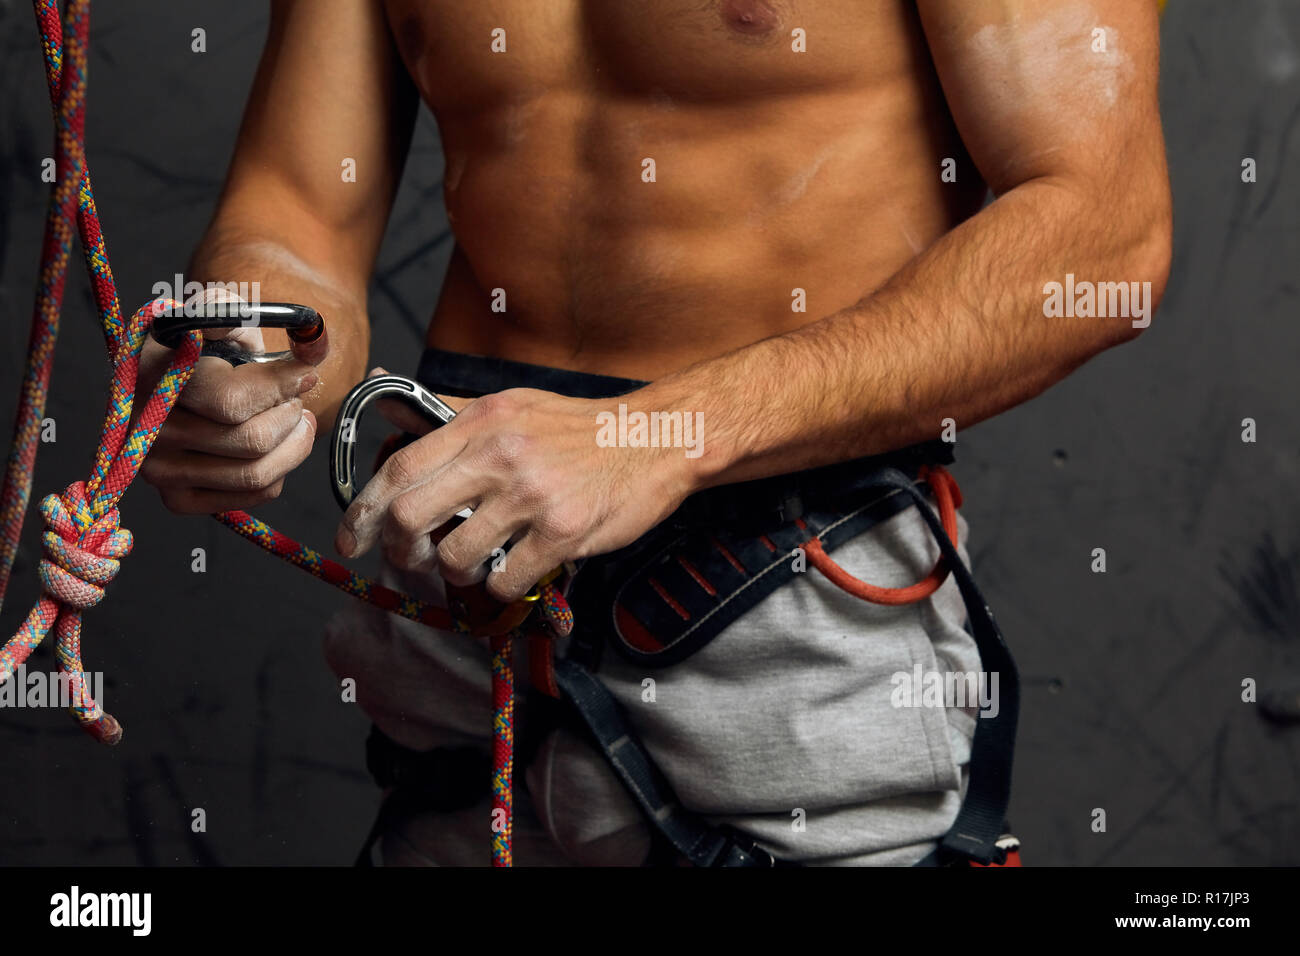 Climber s male hands with equipment during preparation for climb, close-up. Stock Photo